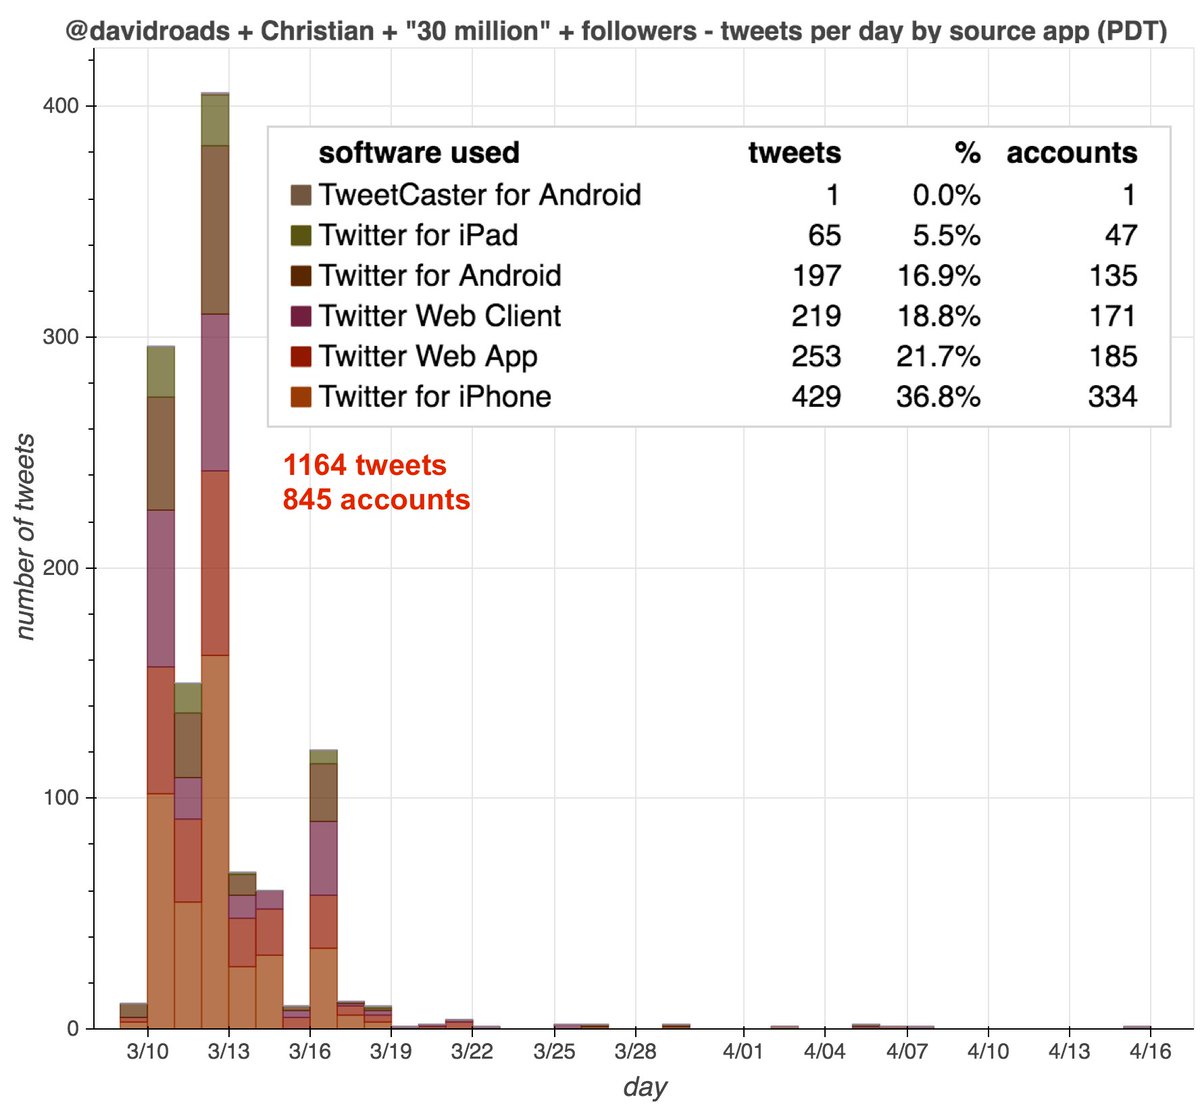 We downloaded all tweets tagging the now-suspended  @davidroads and containing "Christian", "30 million", and "followers, yielding 1164 tweets from 845 accounts. The traffic doesn't appear automated based on software used.